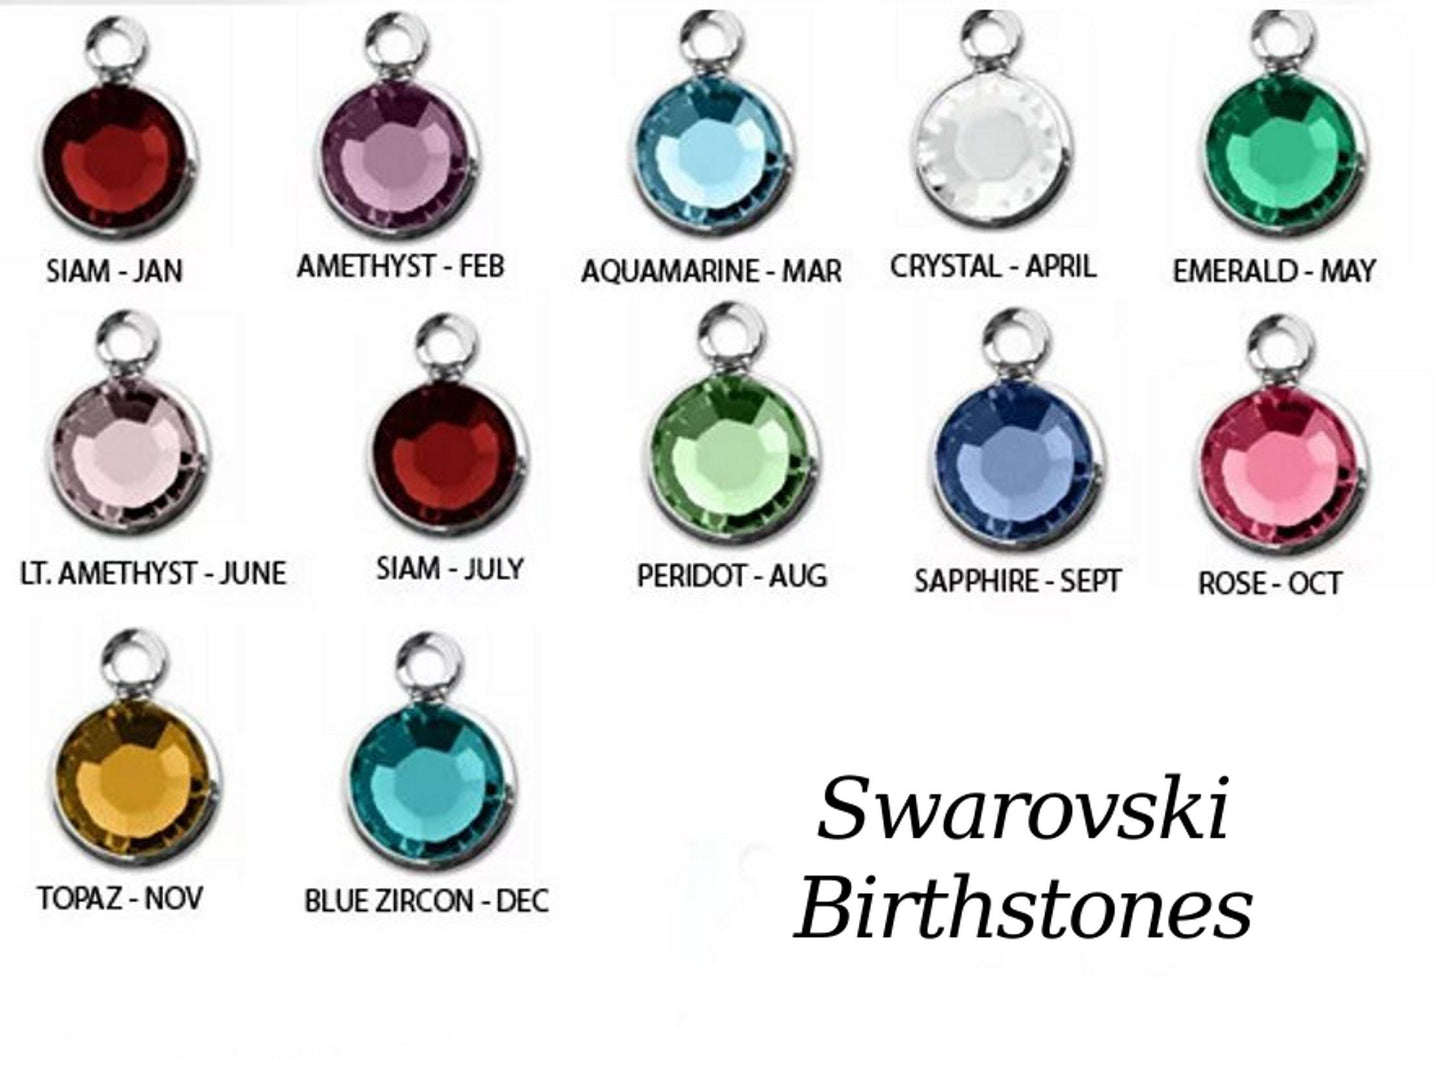 Gilded Sapphire custom necklace options for birthstone charms on a white background with labels.